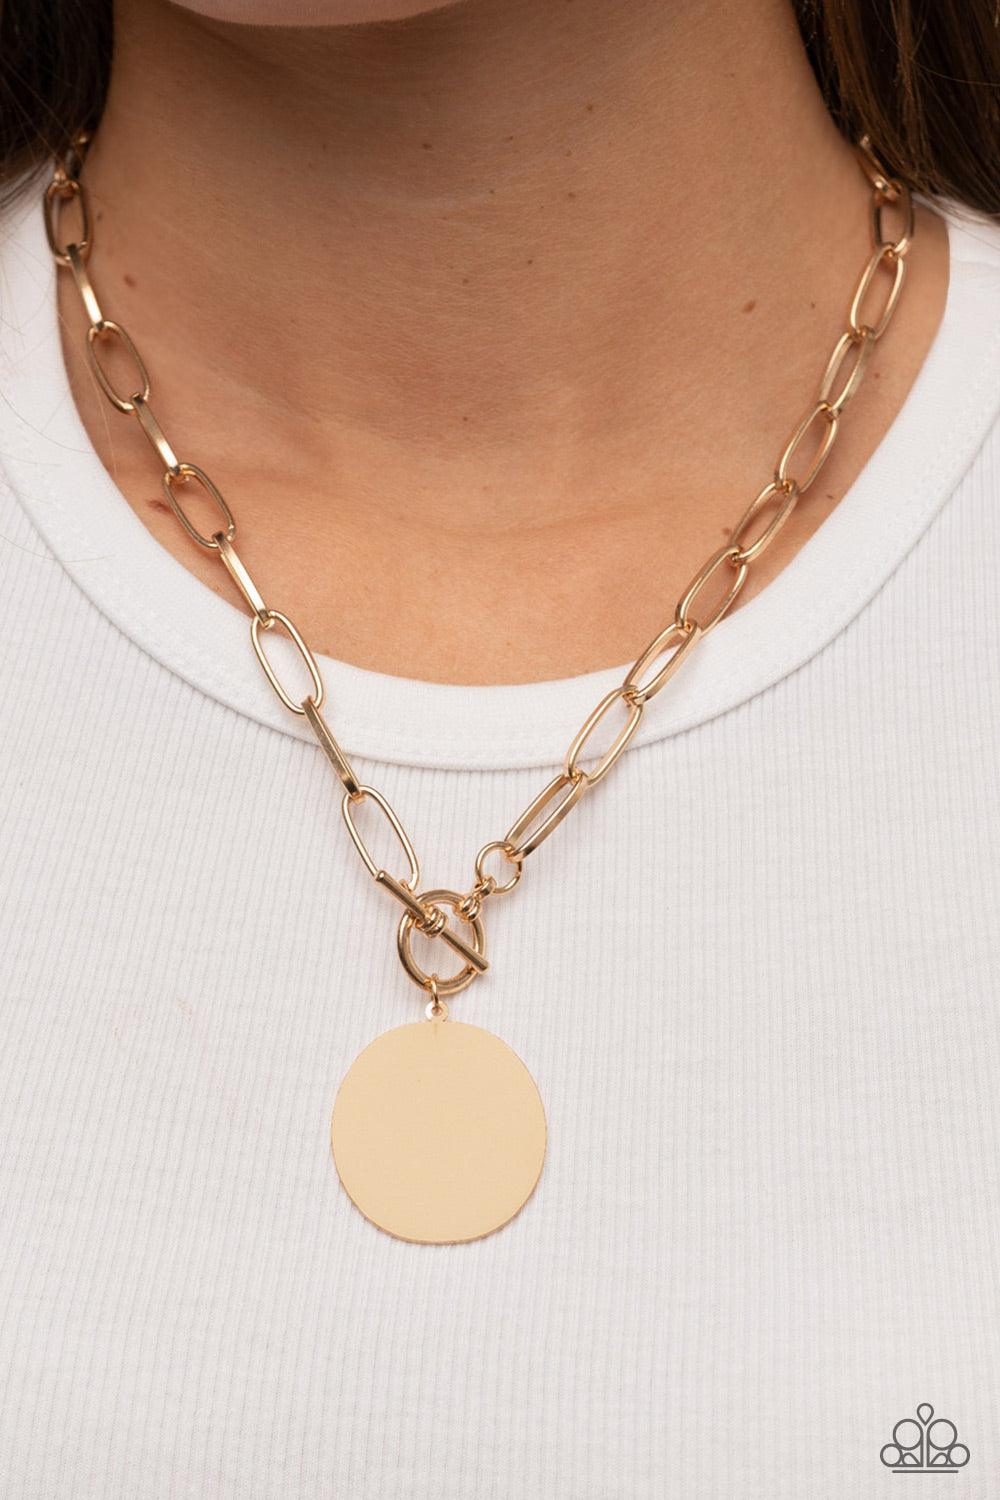 Tag Out Paparazzi Gold Necklace - Jewelry by Bretta